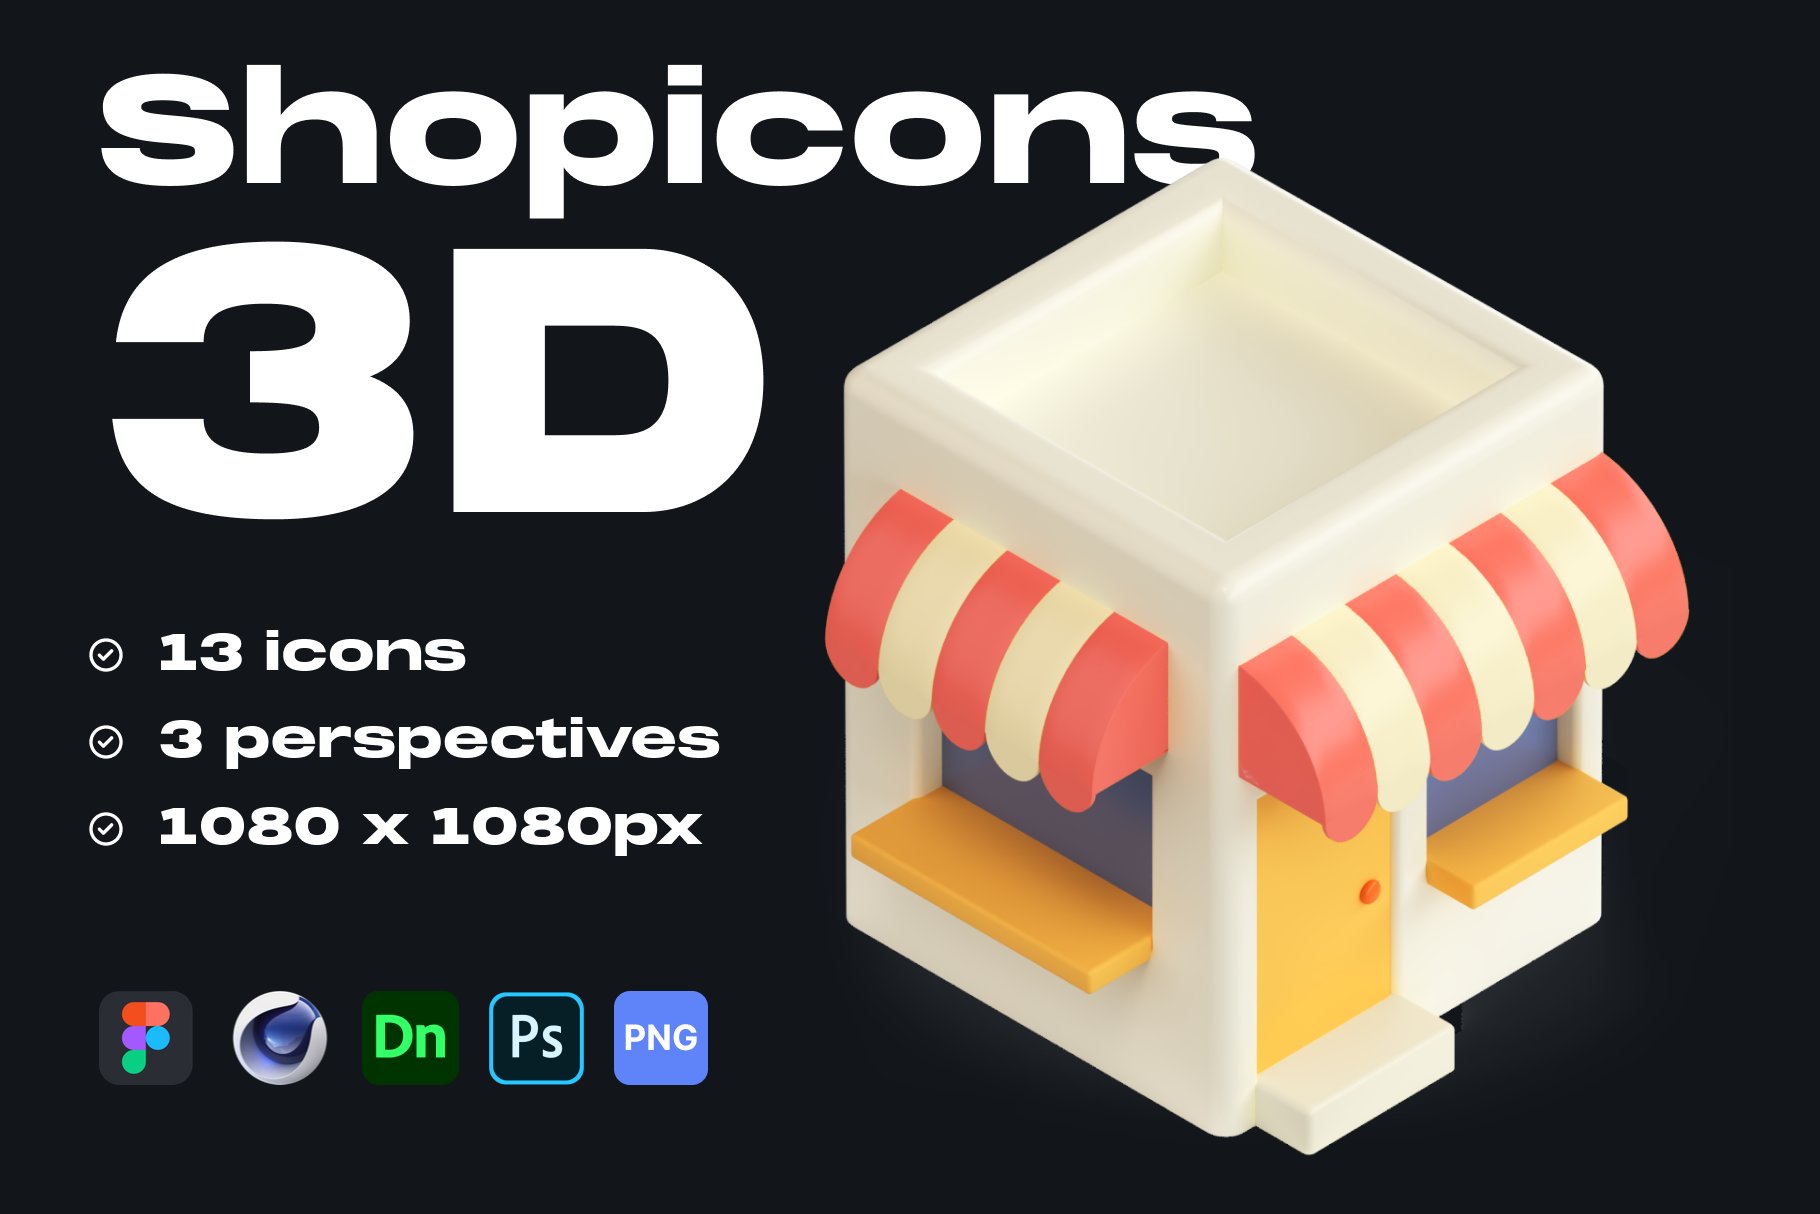 3D Shopping Icon Pack - Shopicons cover image.